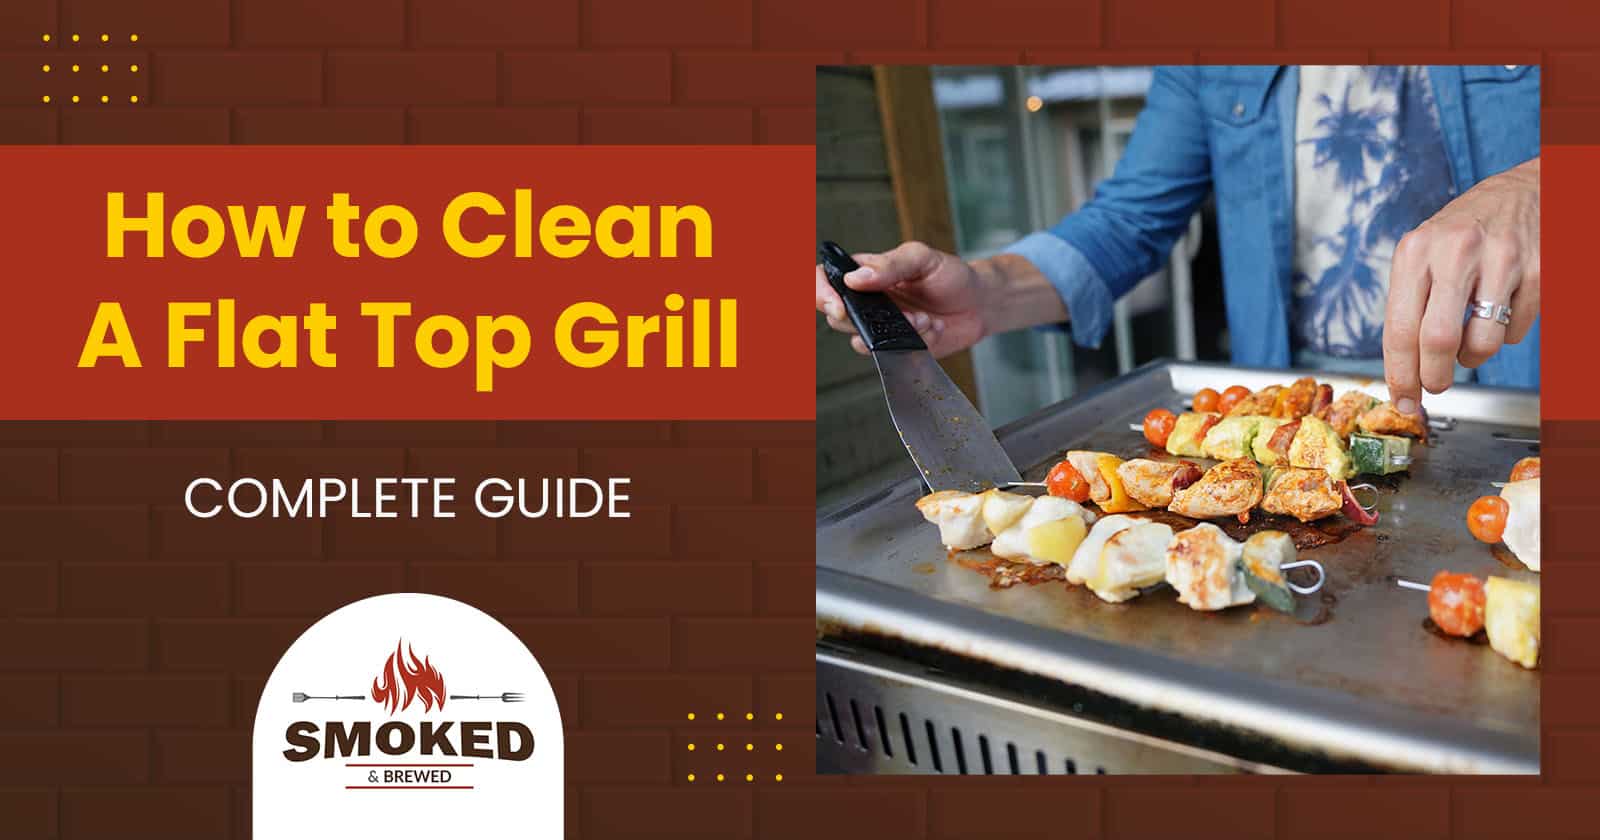 How To Clean A Flat Top Grill